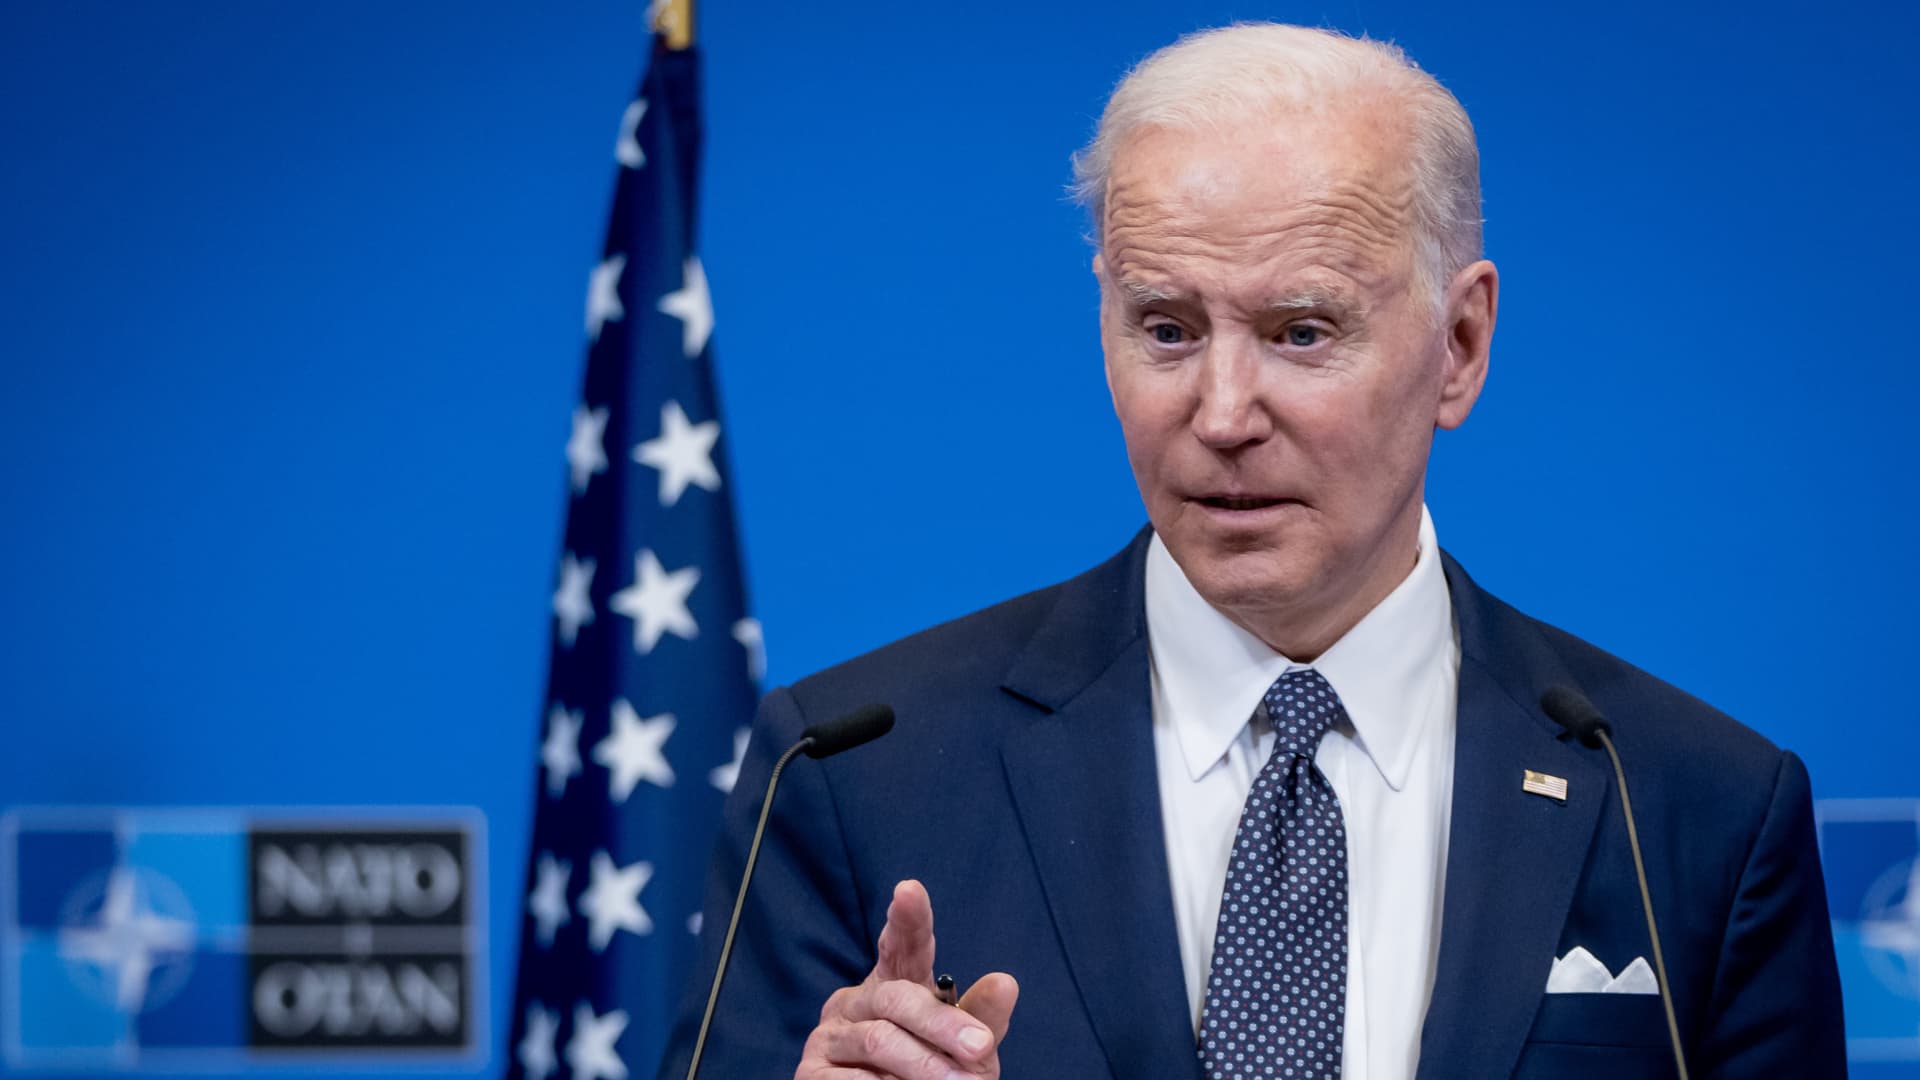 U.S. President Joe Biden attends a press conference after the special NATO summit at NATO headquarters. The meeting is to discuss the current situation in Russia's war in Ukraine.